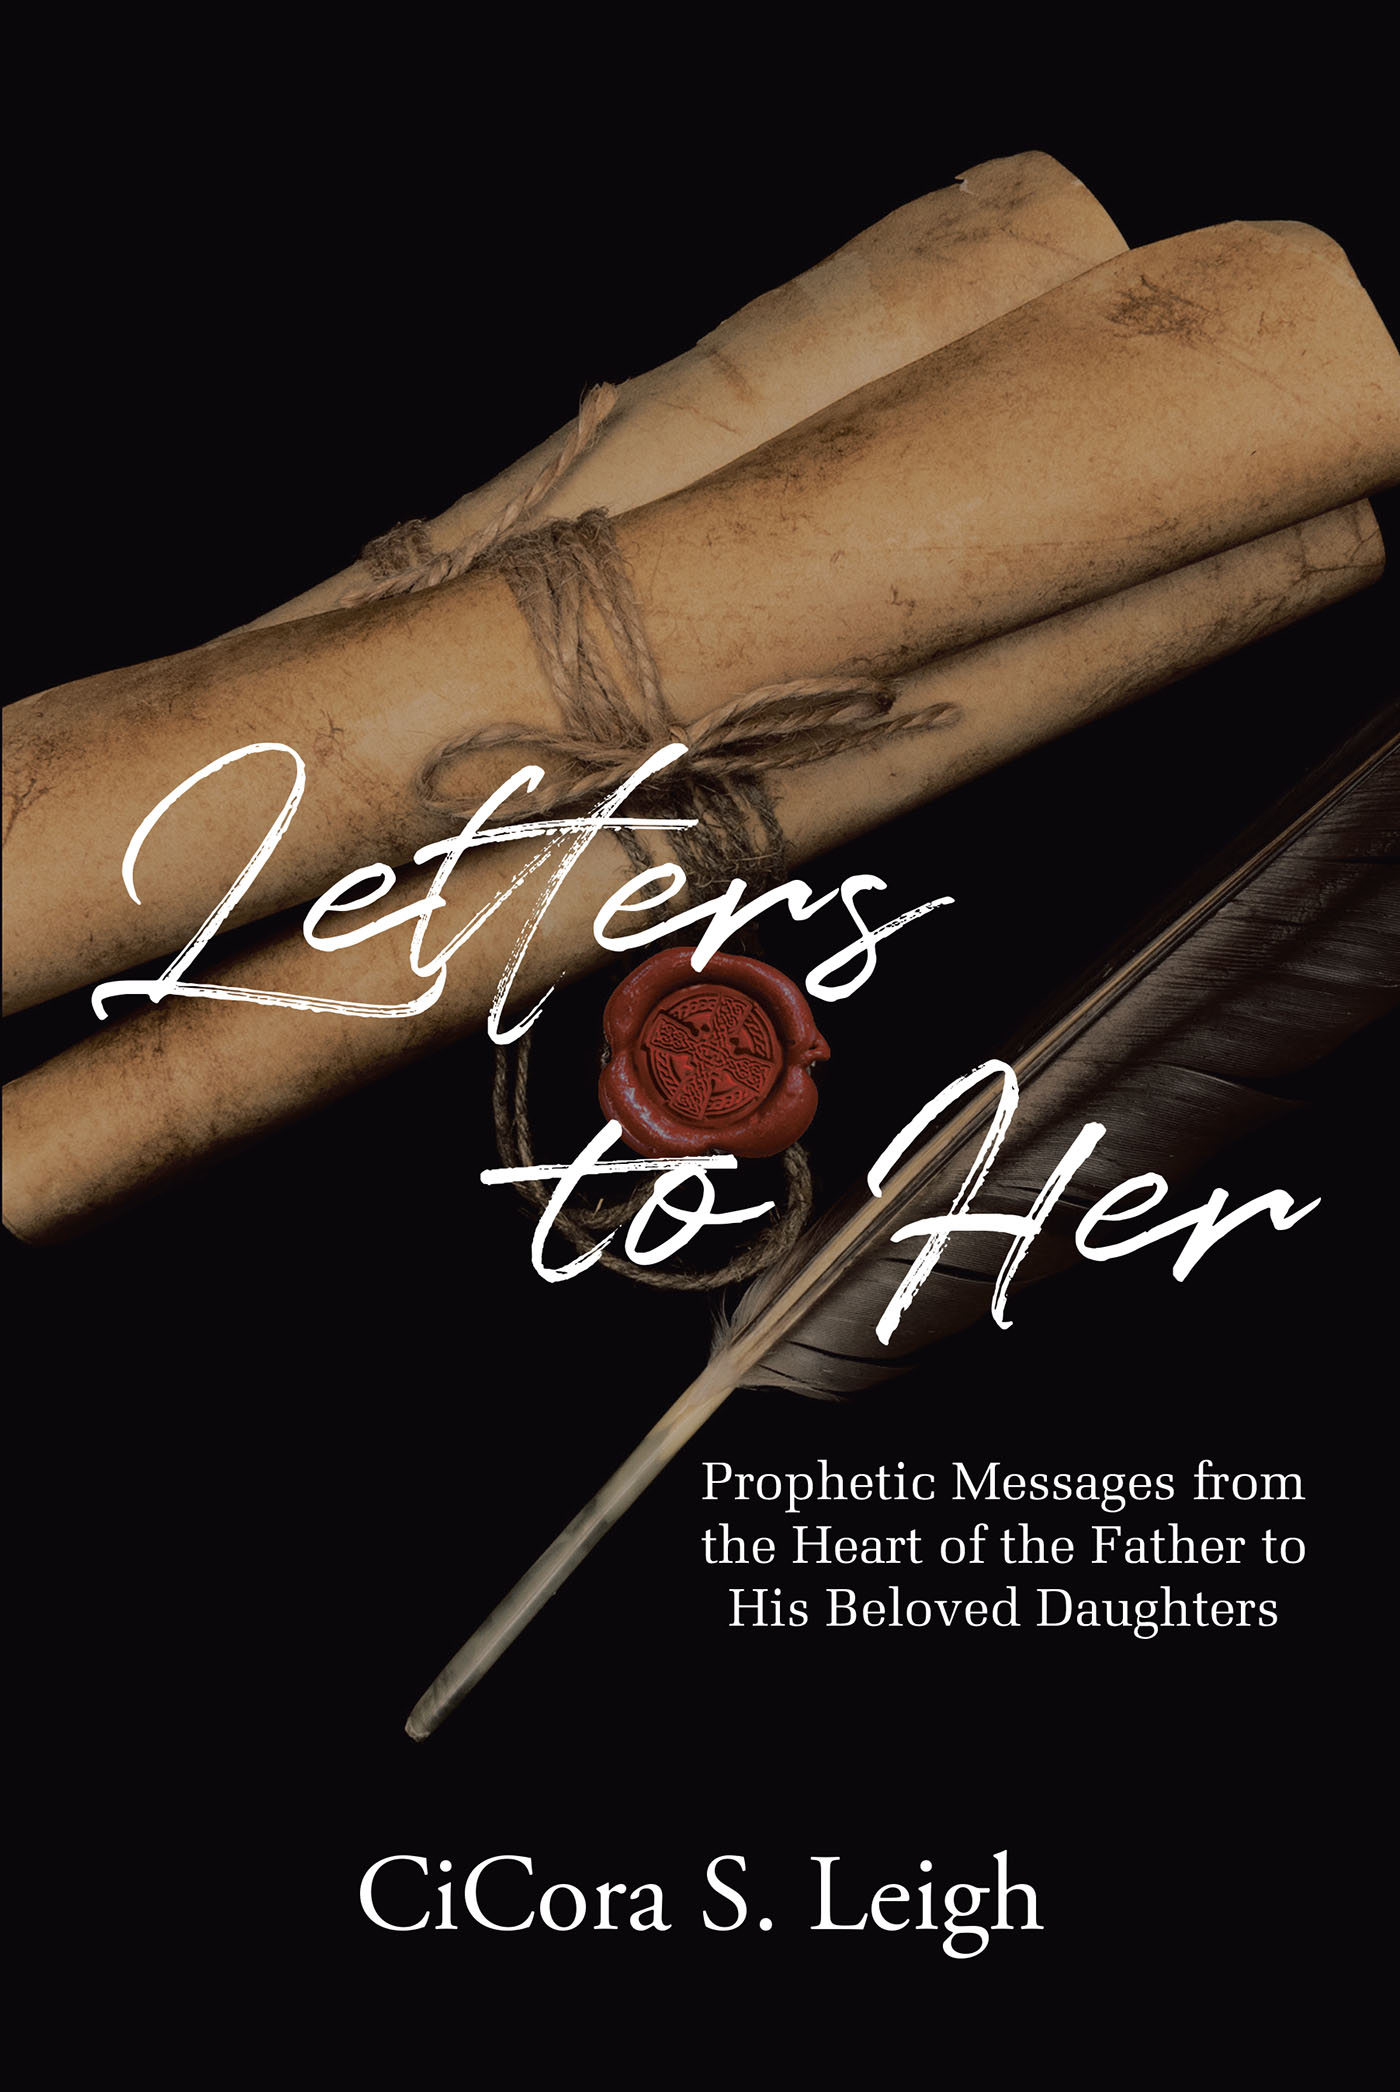 CiCora S. Leigh’s Newly Released “Letters to Her” is a Passionate Message of God’s Love for Women of All Ages and Backgrounds